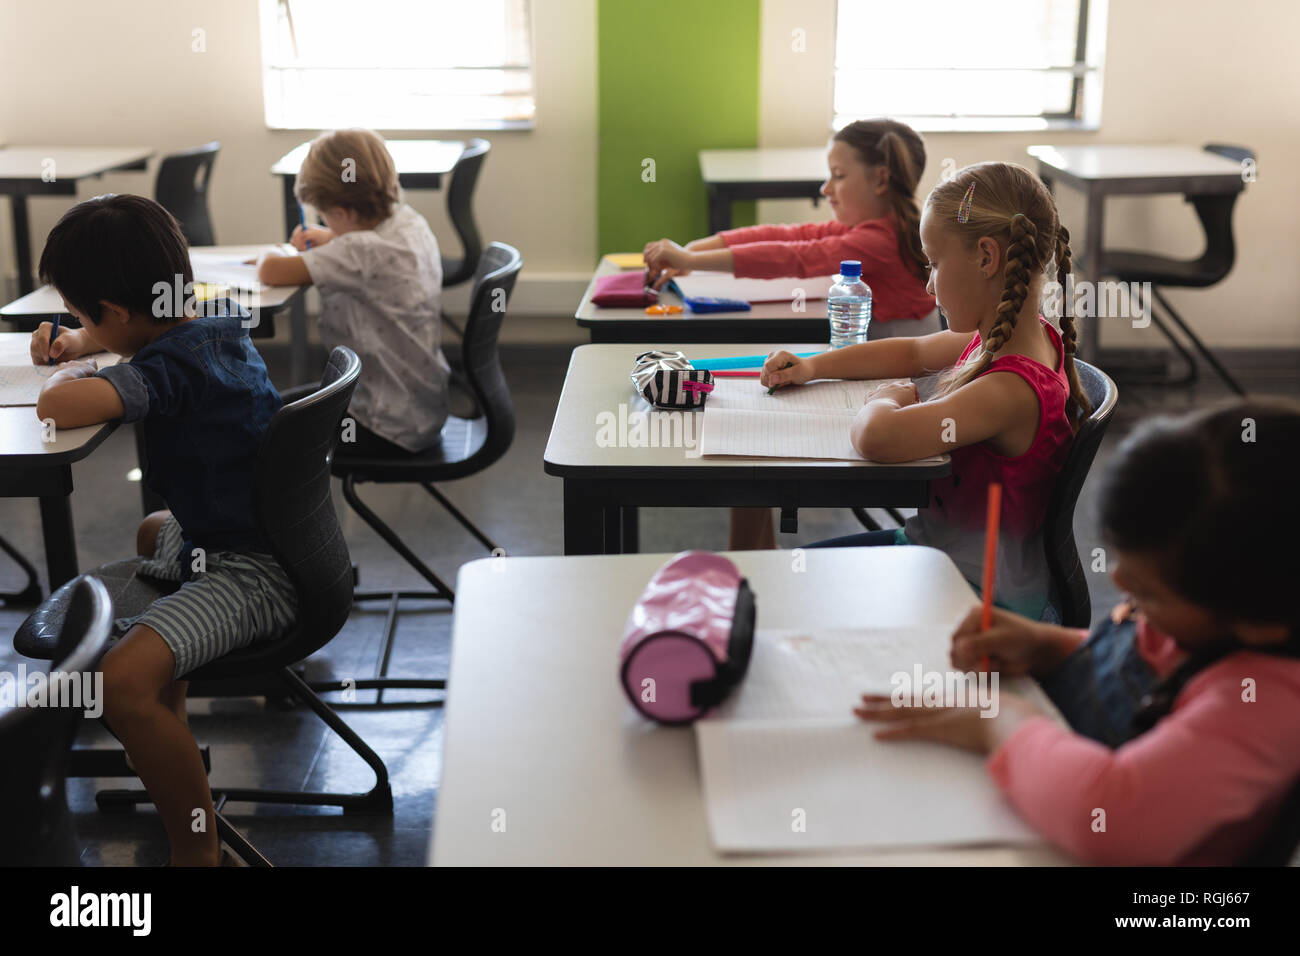 Kids studying in classroom sitting at desks in school Stock Photo